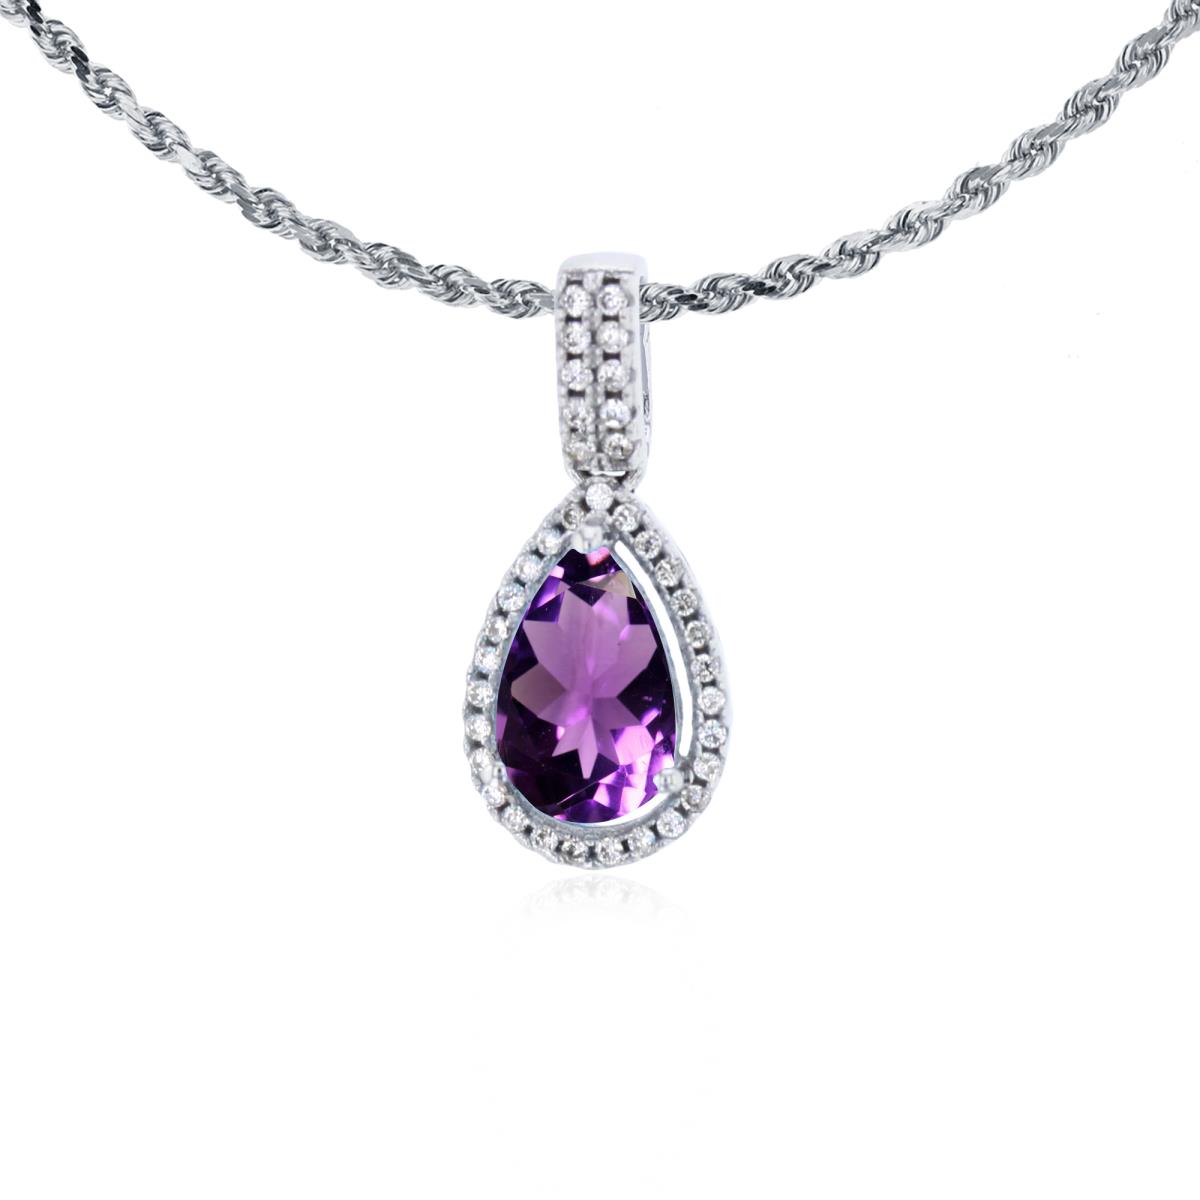 10K White Gold 8x5mm Pear Cut Amethyst & 0.11 CTTW Diamond Halo 18" Rope Chain Necklace